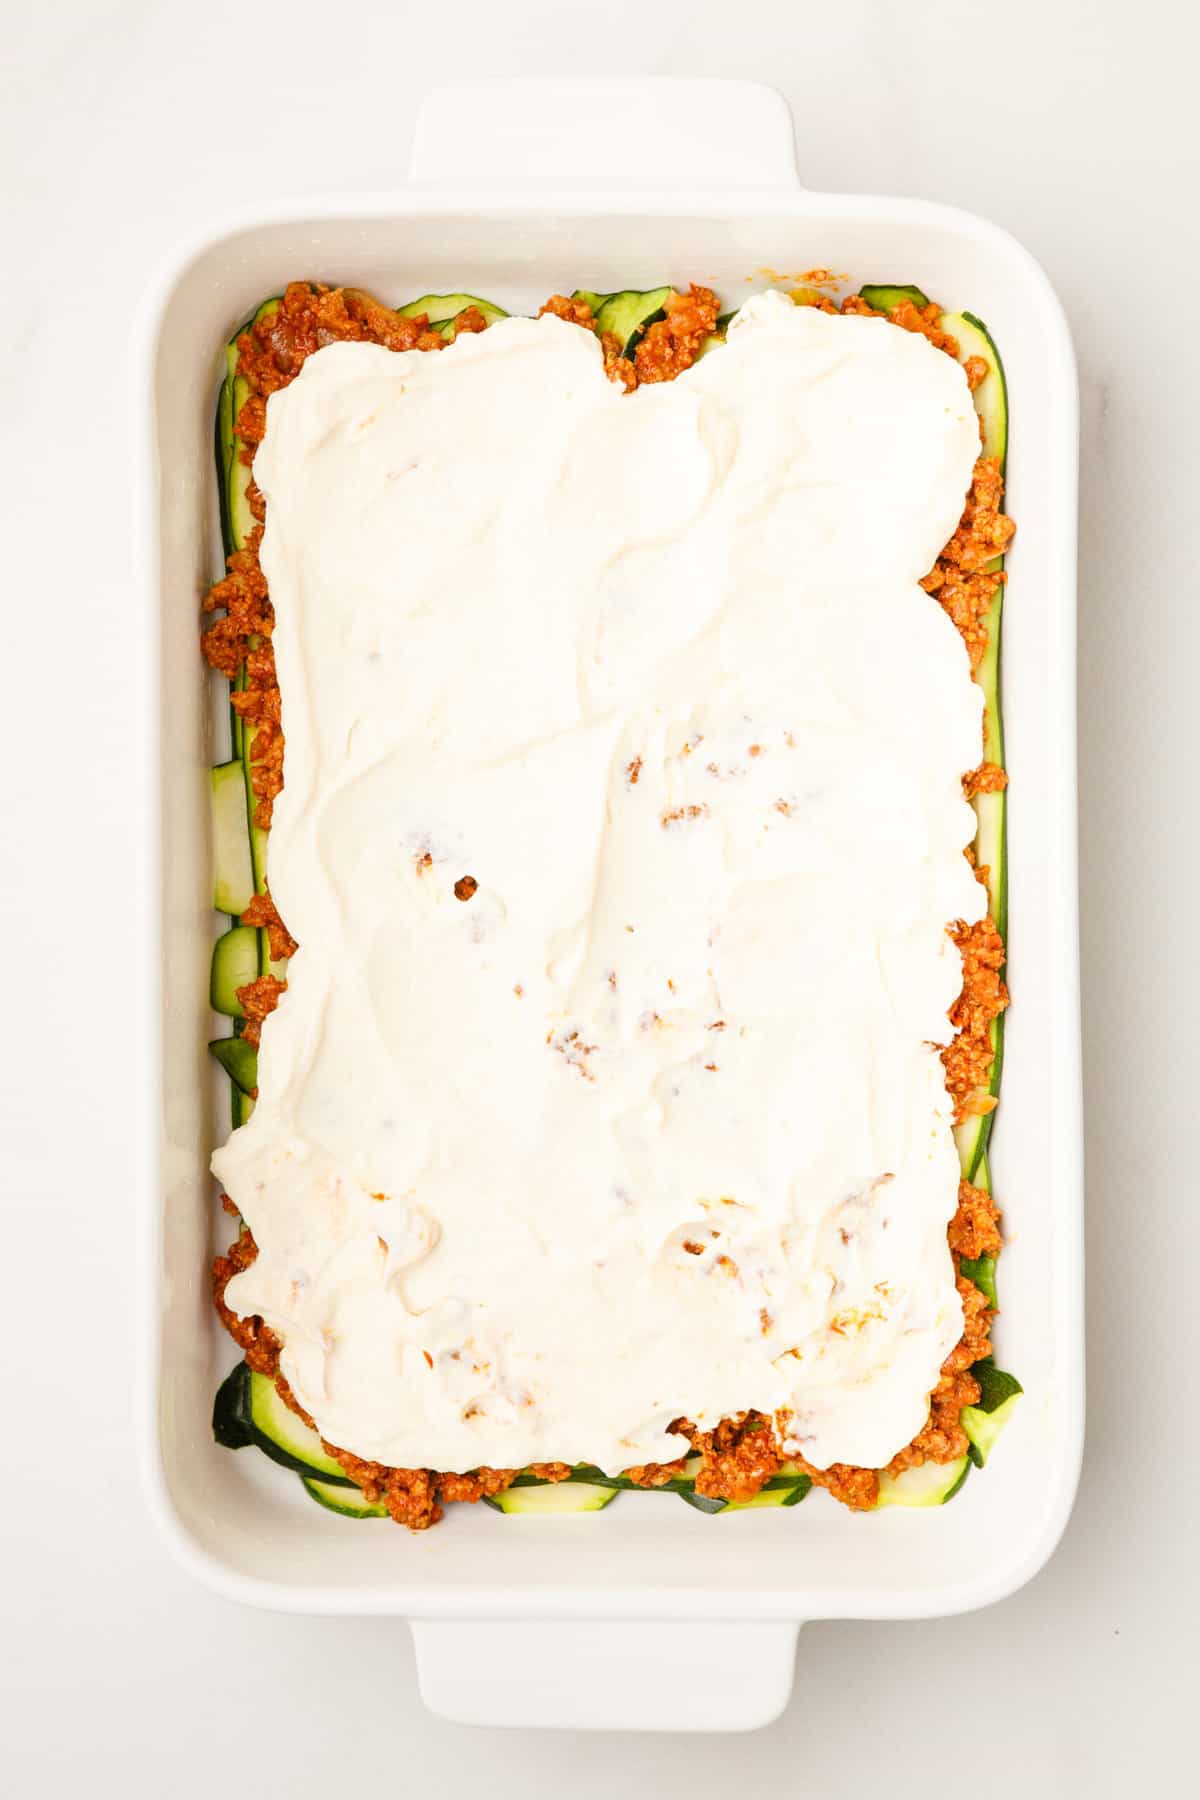 thinly sliced zucchini layered at the bottom of a 9x13 casserole dish topped with hearty tomato based ground beef and ricotta cheese